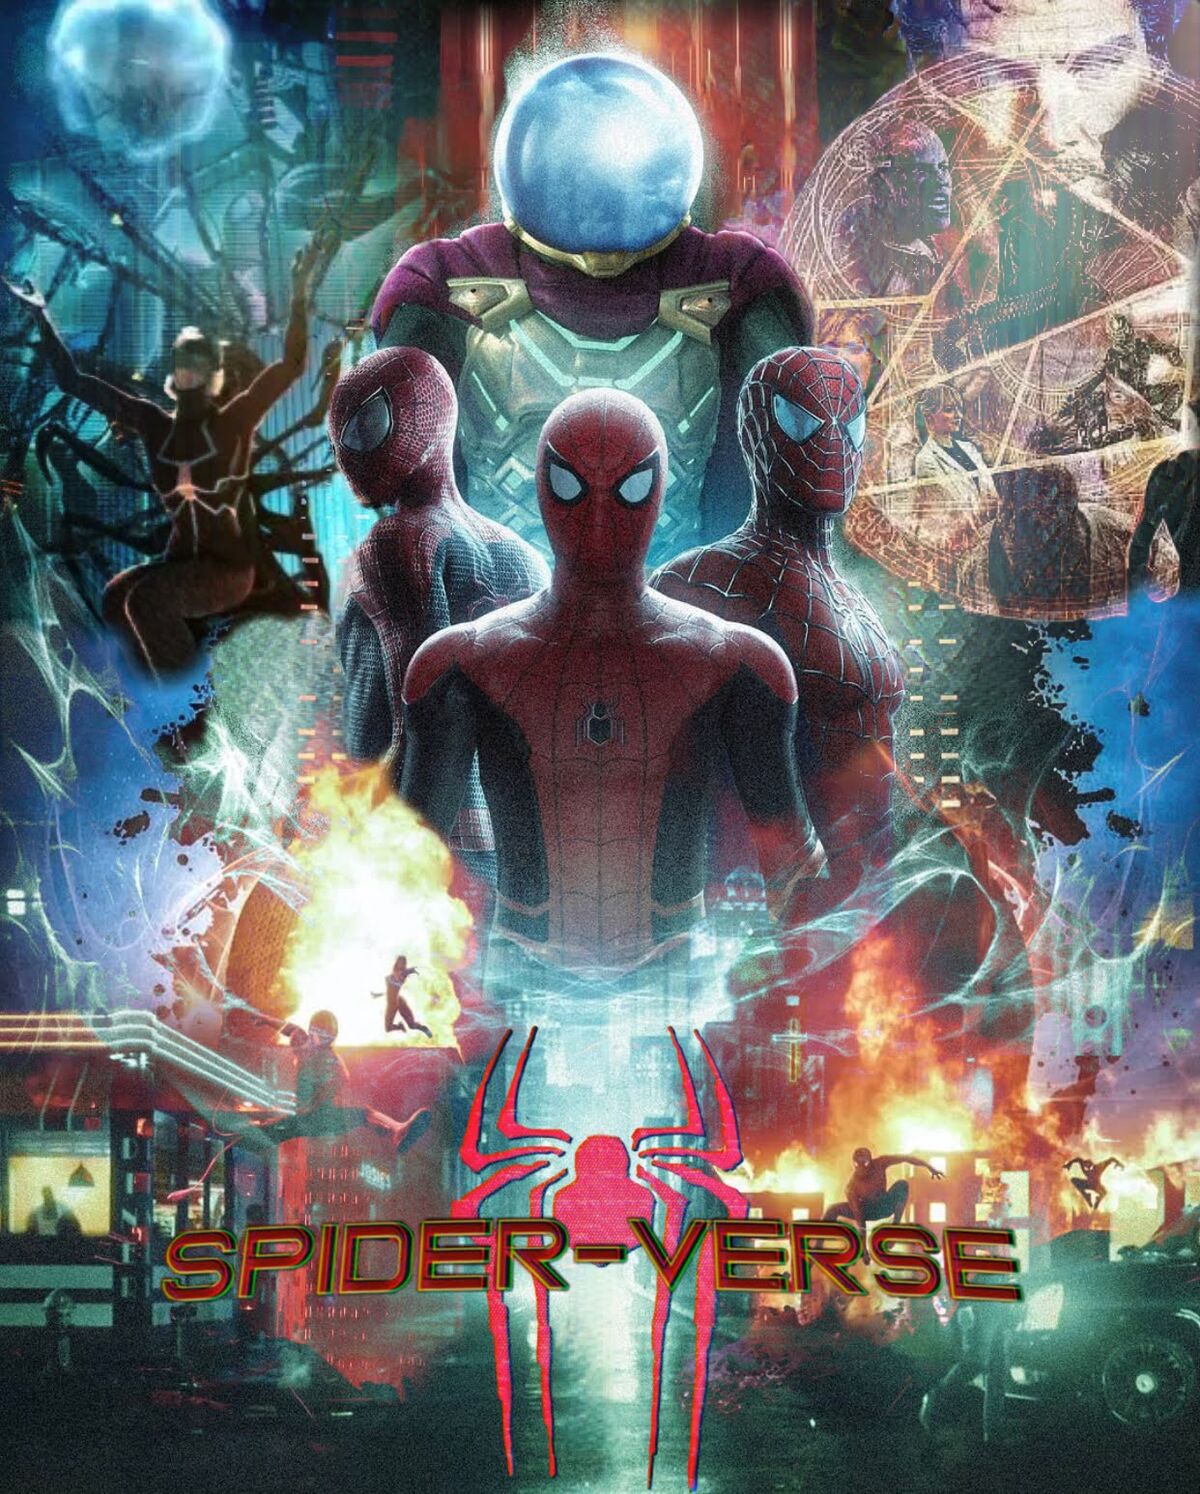 R-Rated SPIDER-MAN Brings Blood and Guts to Marvel's Multiverse